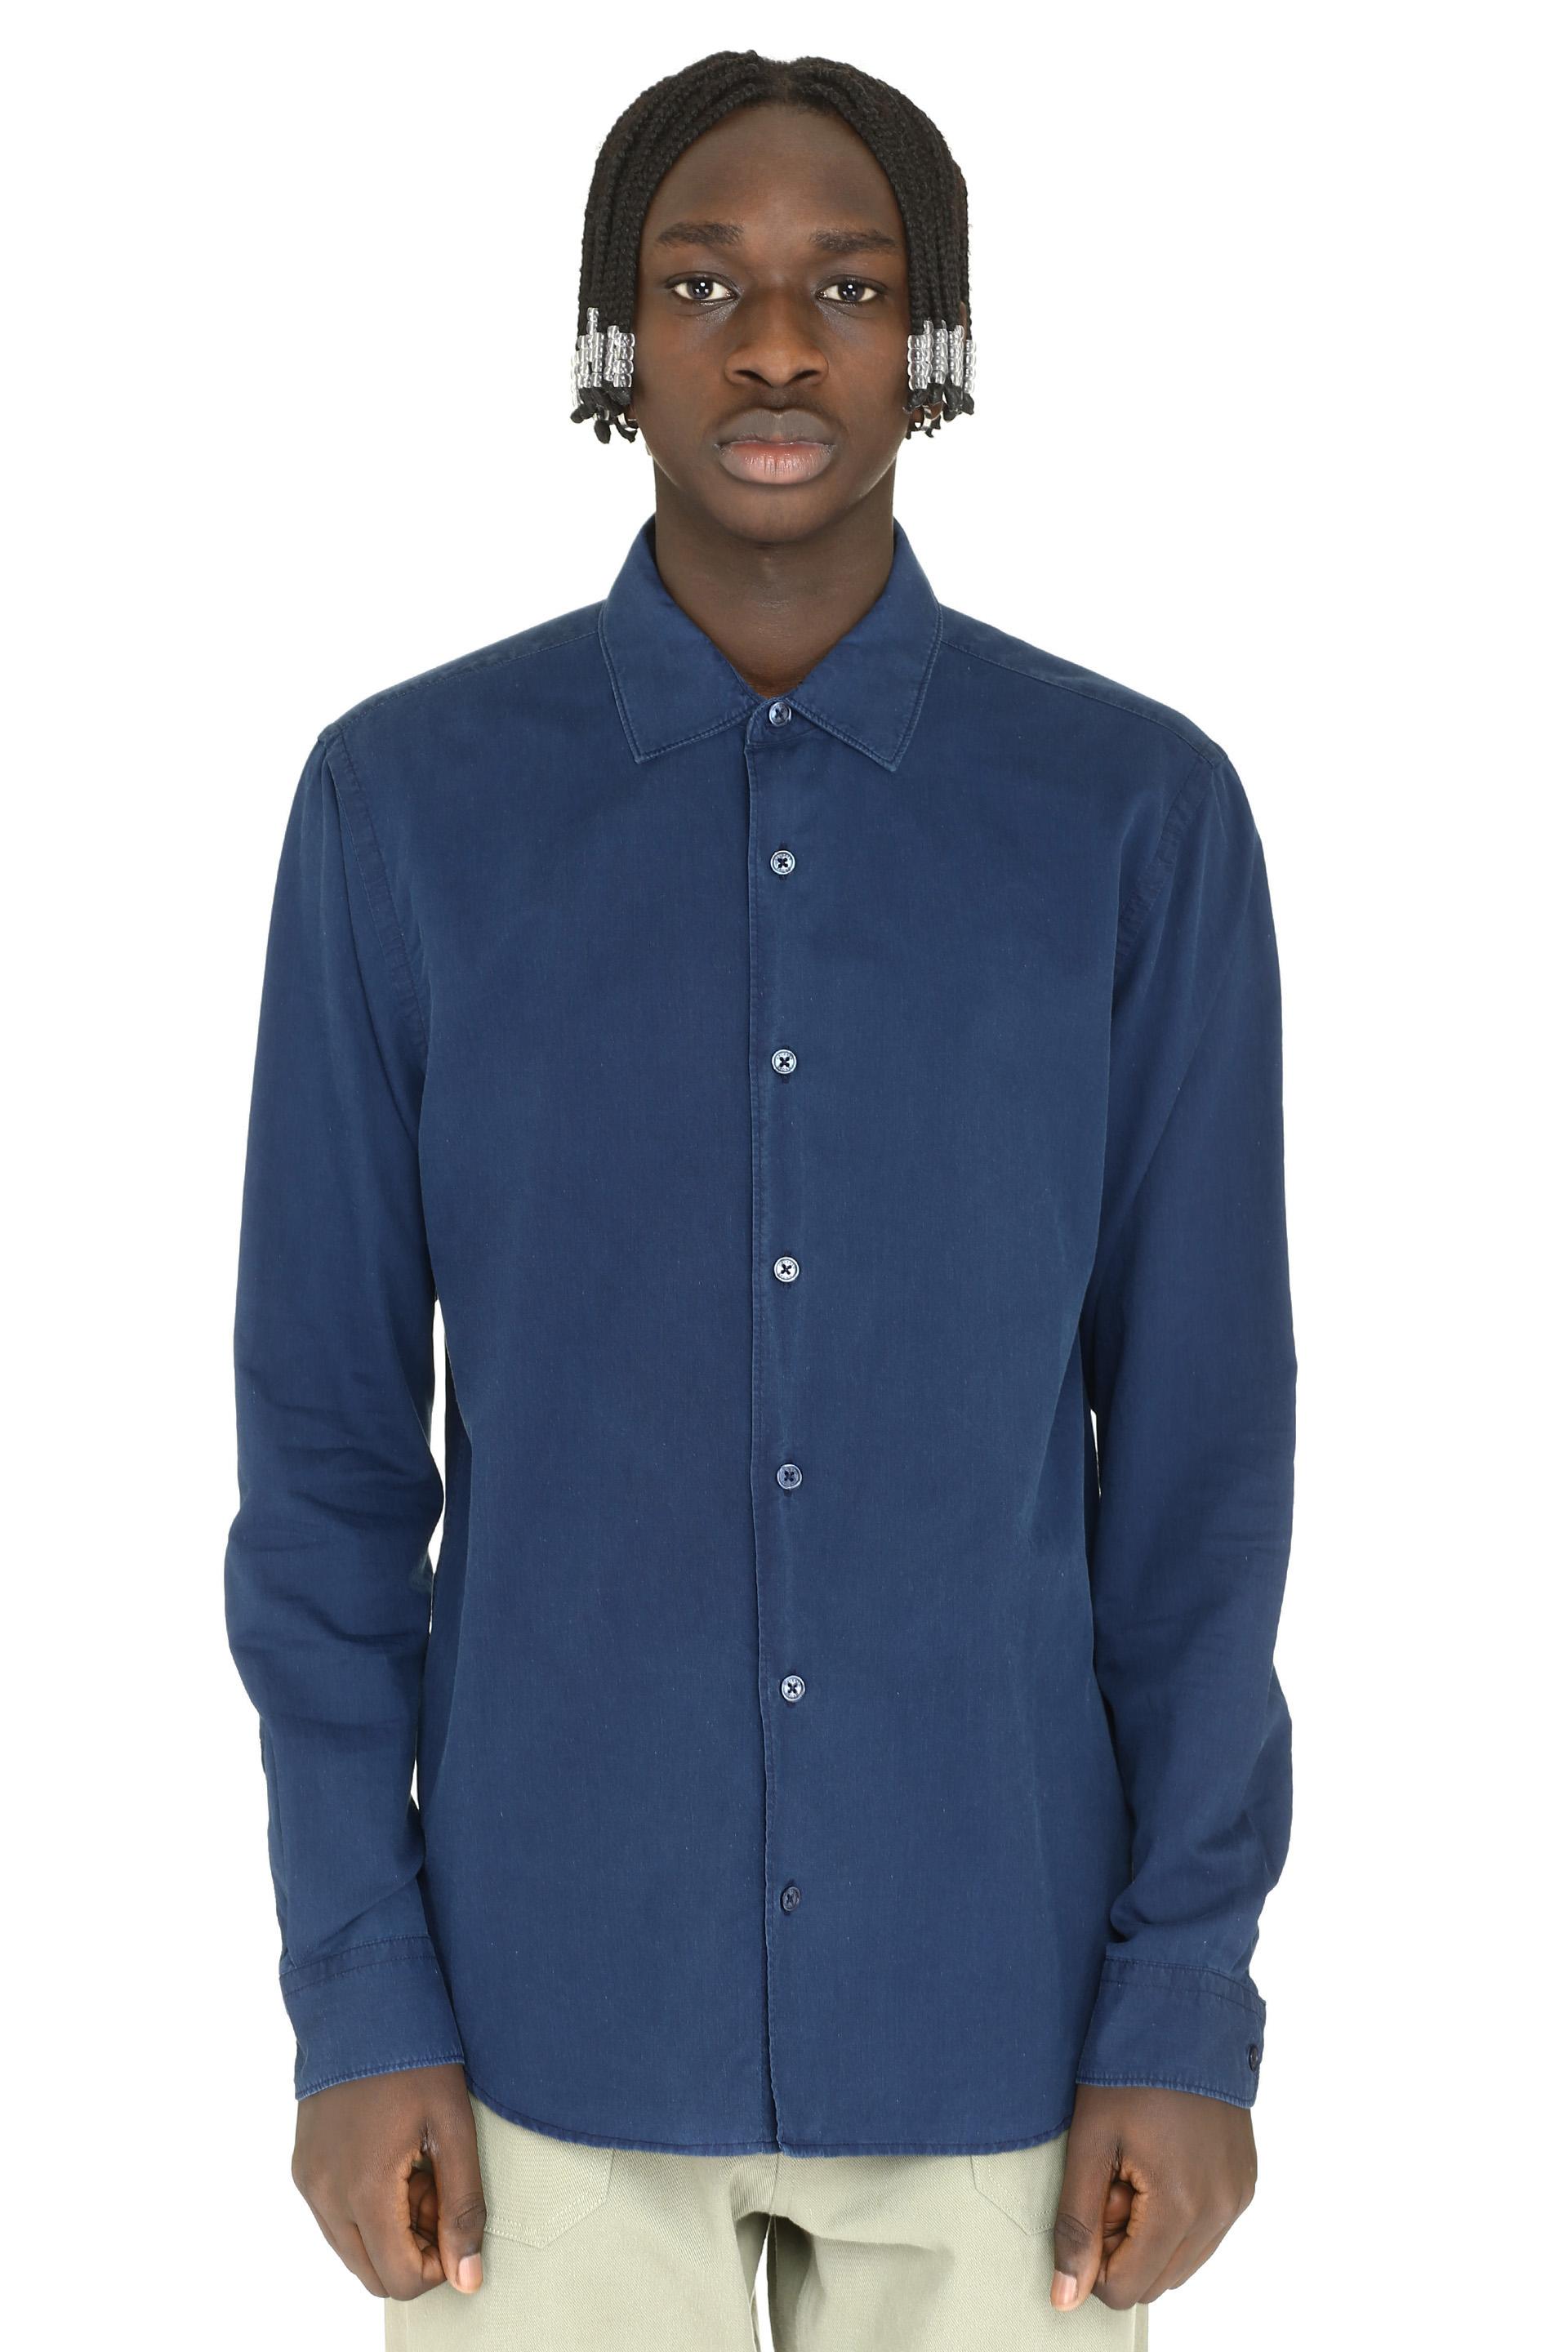 Orlebar Brown Giles Cotton Shirt in Blue for Men - Lyst